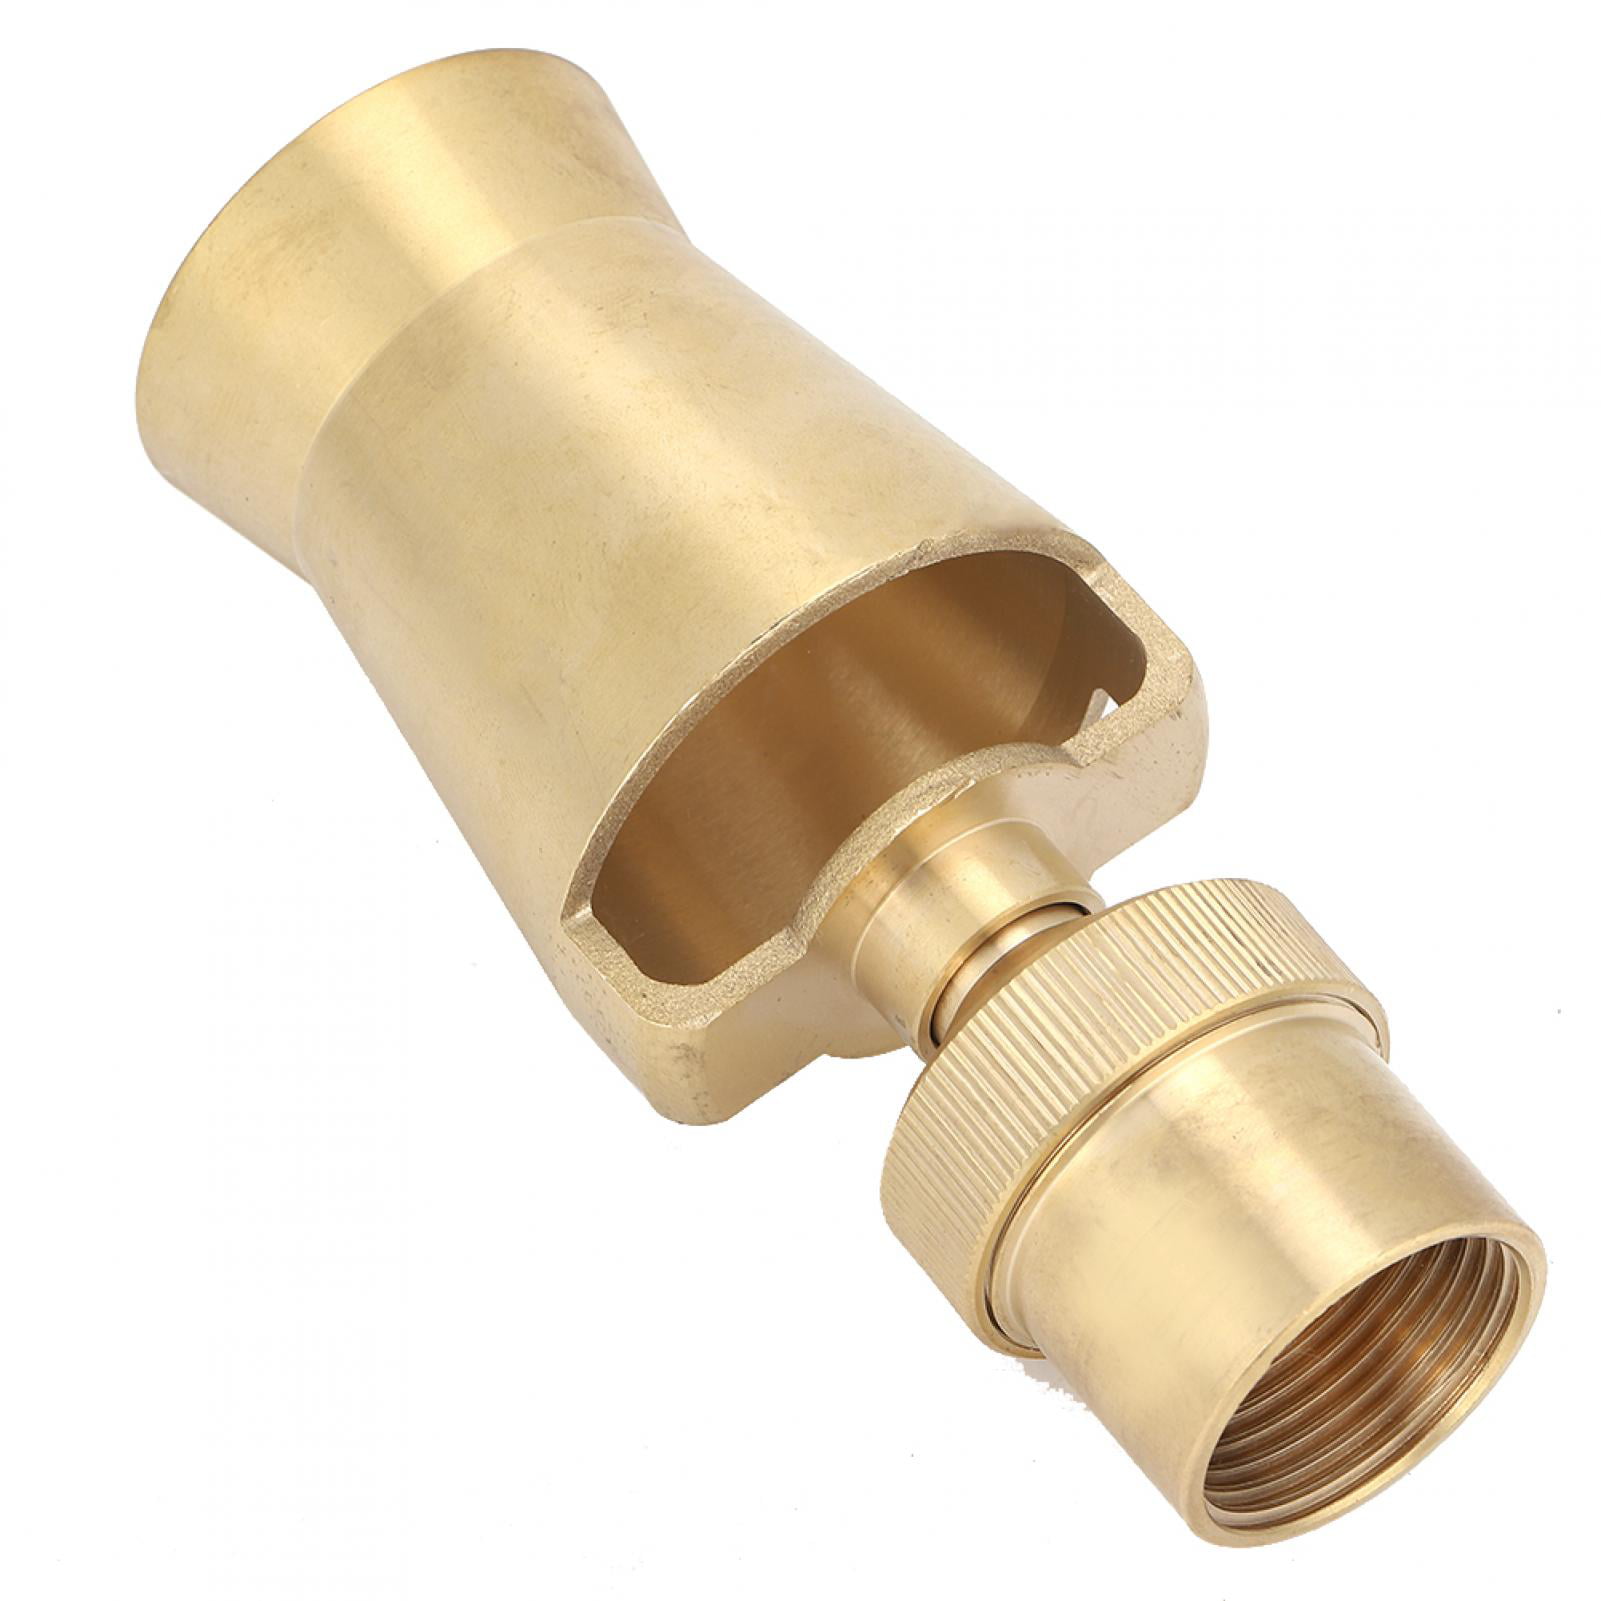 Spa Hot Spring Water Fountain Nozzle Water Park Spray Head Sprinkler for Swimming Pool 1In DN25 Female Thread Fan Shape Copper Fountain Nozzle Sprinkler Spray Head 